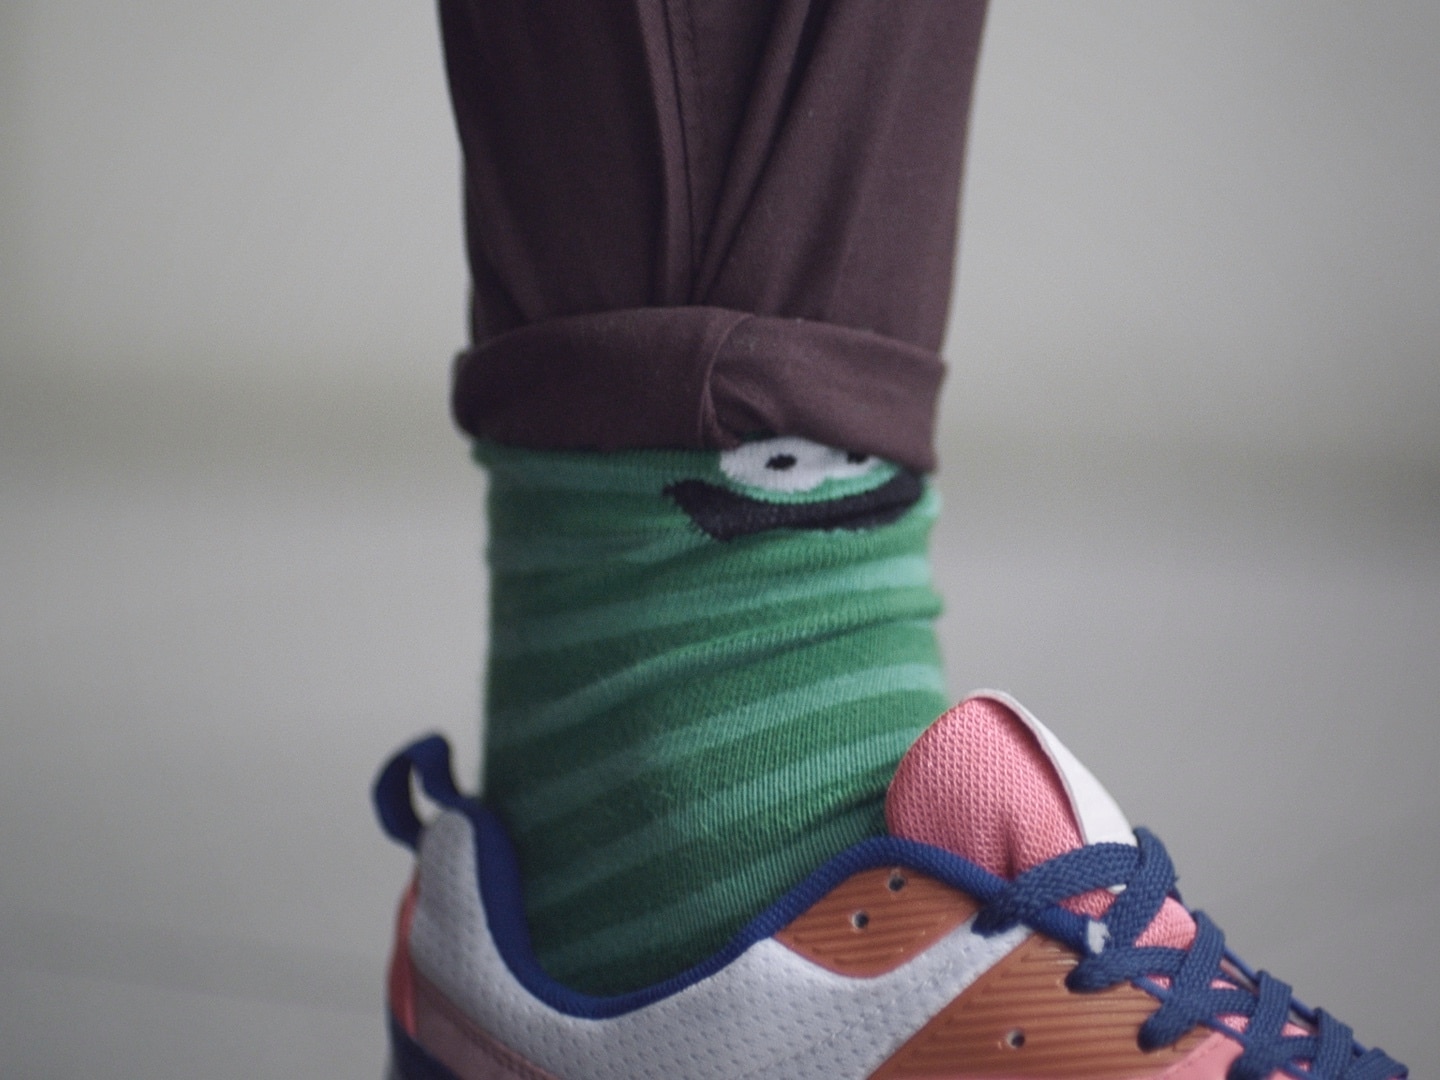 A guy in brightly colored socks and sneakers, with cuffed pants.